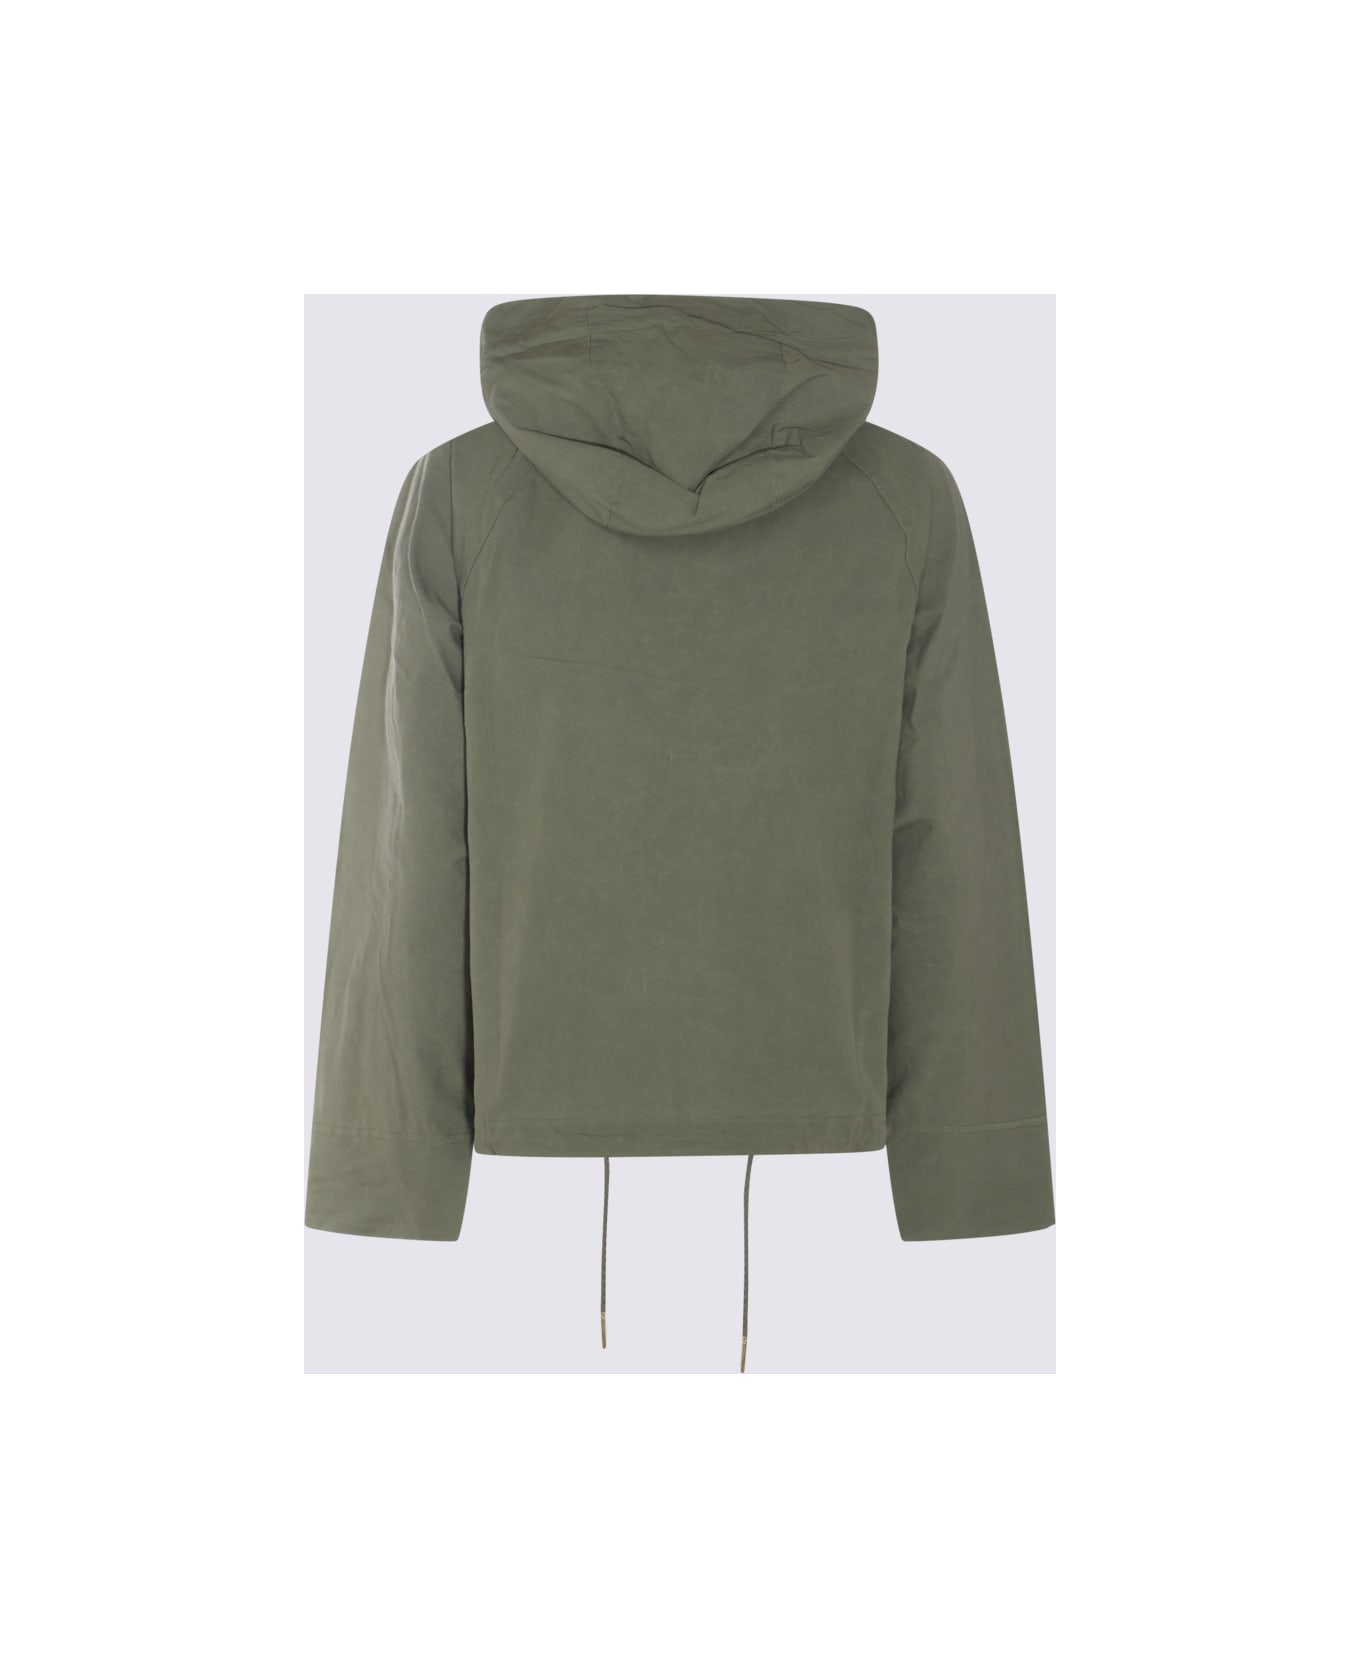 Barbour Army Cotton Casual Jacket - ARMY GREEN